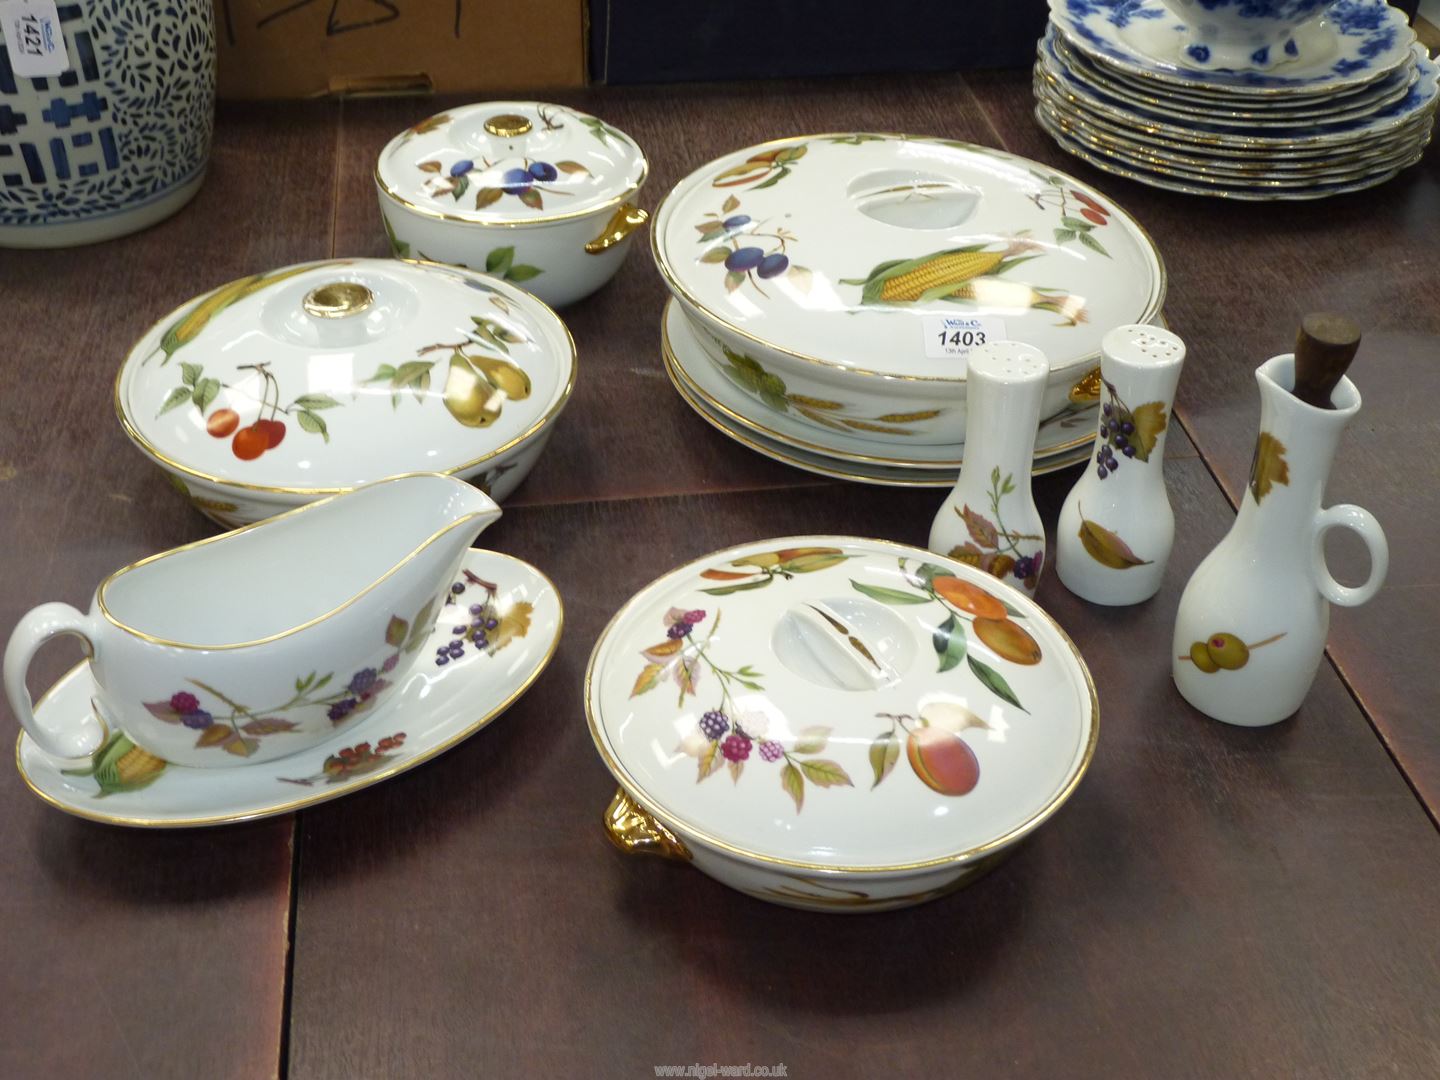 A quantity of Royal Worcester 'Evesham' oven to table ware, gravy boat, cruets, etc.